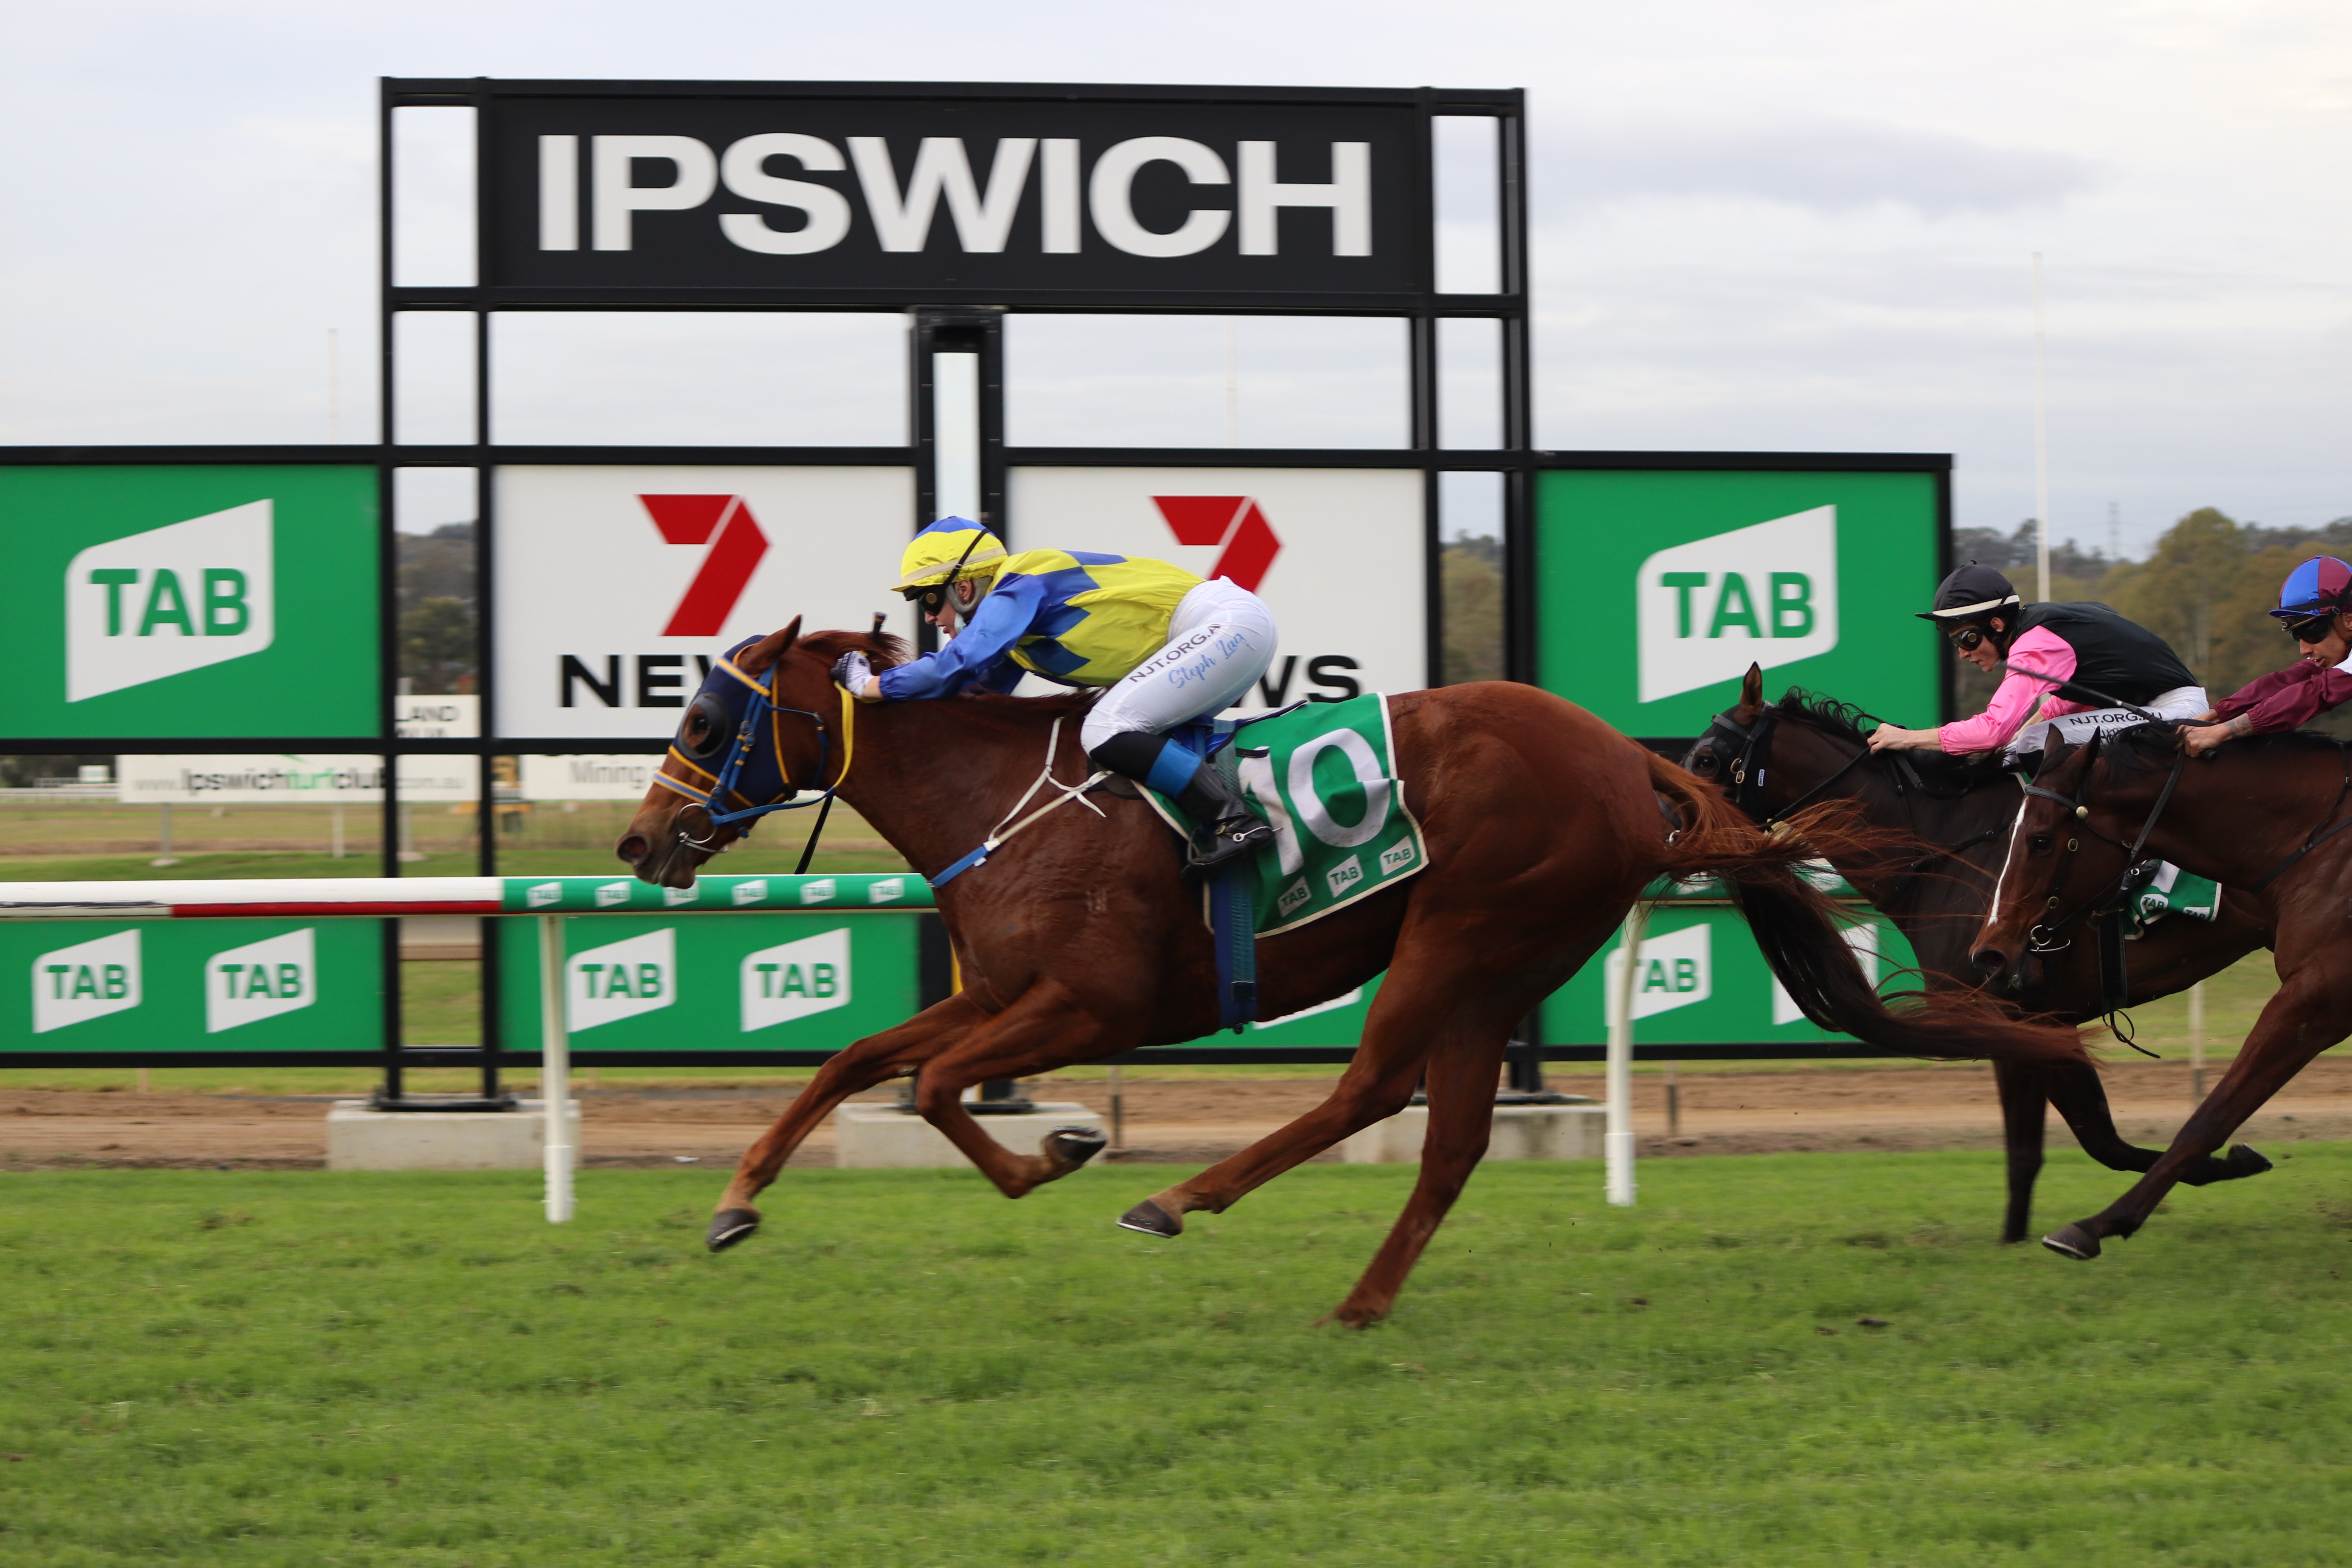 Crime Stoppers Ipswich Committee Race Day